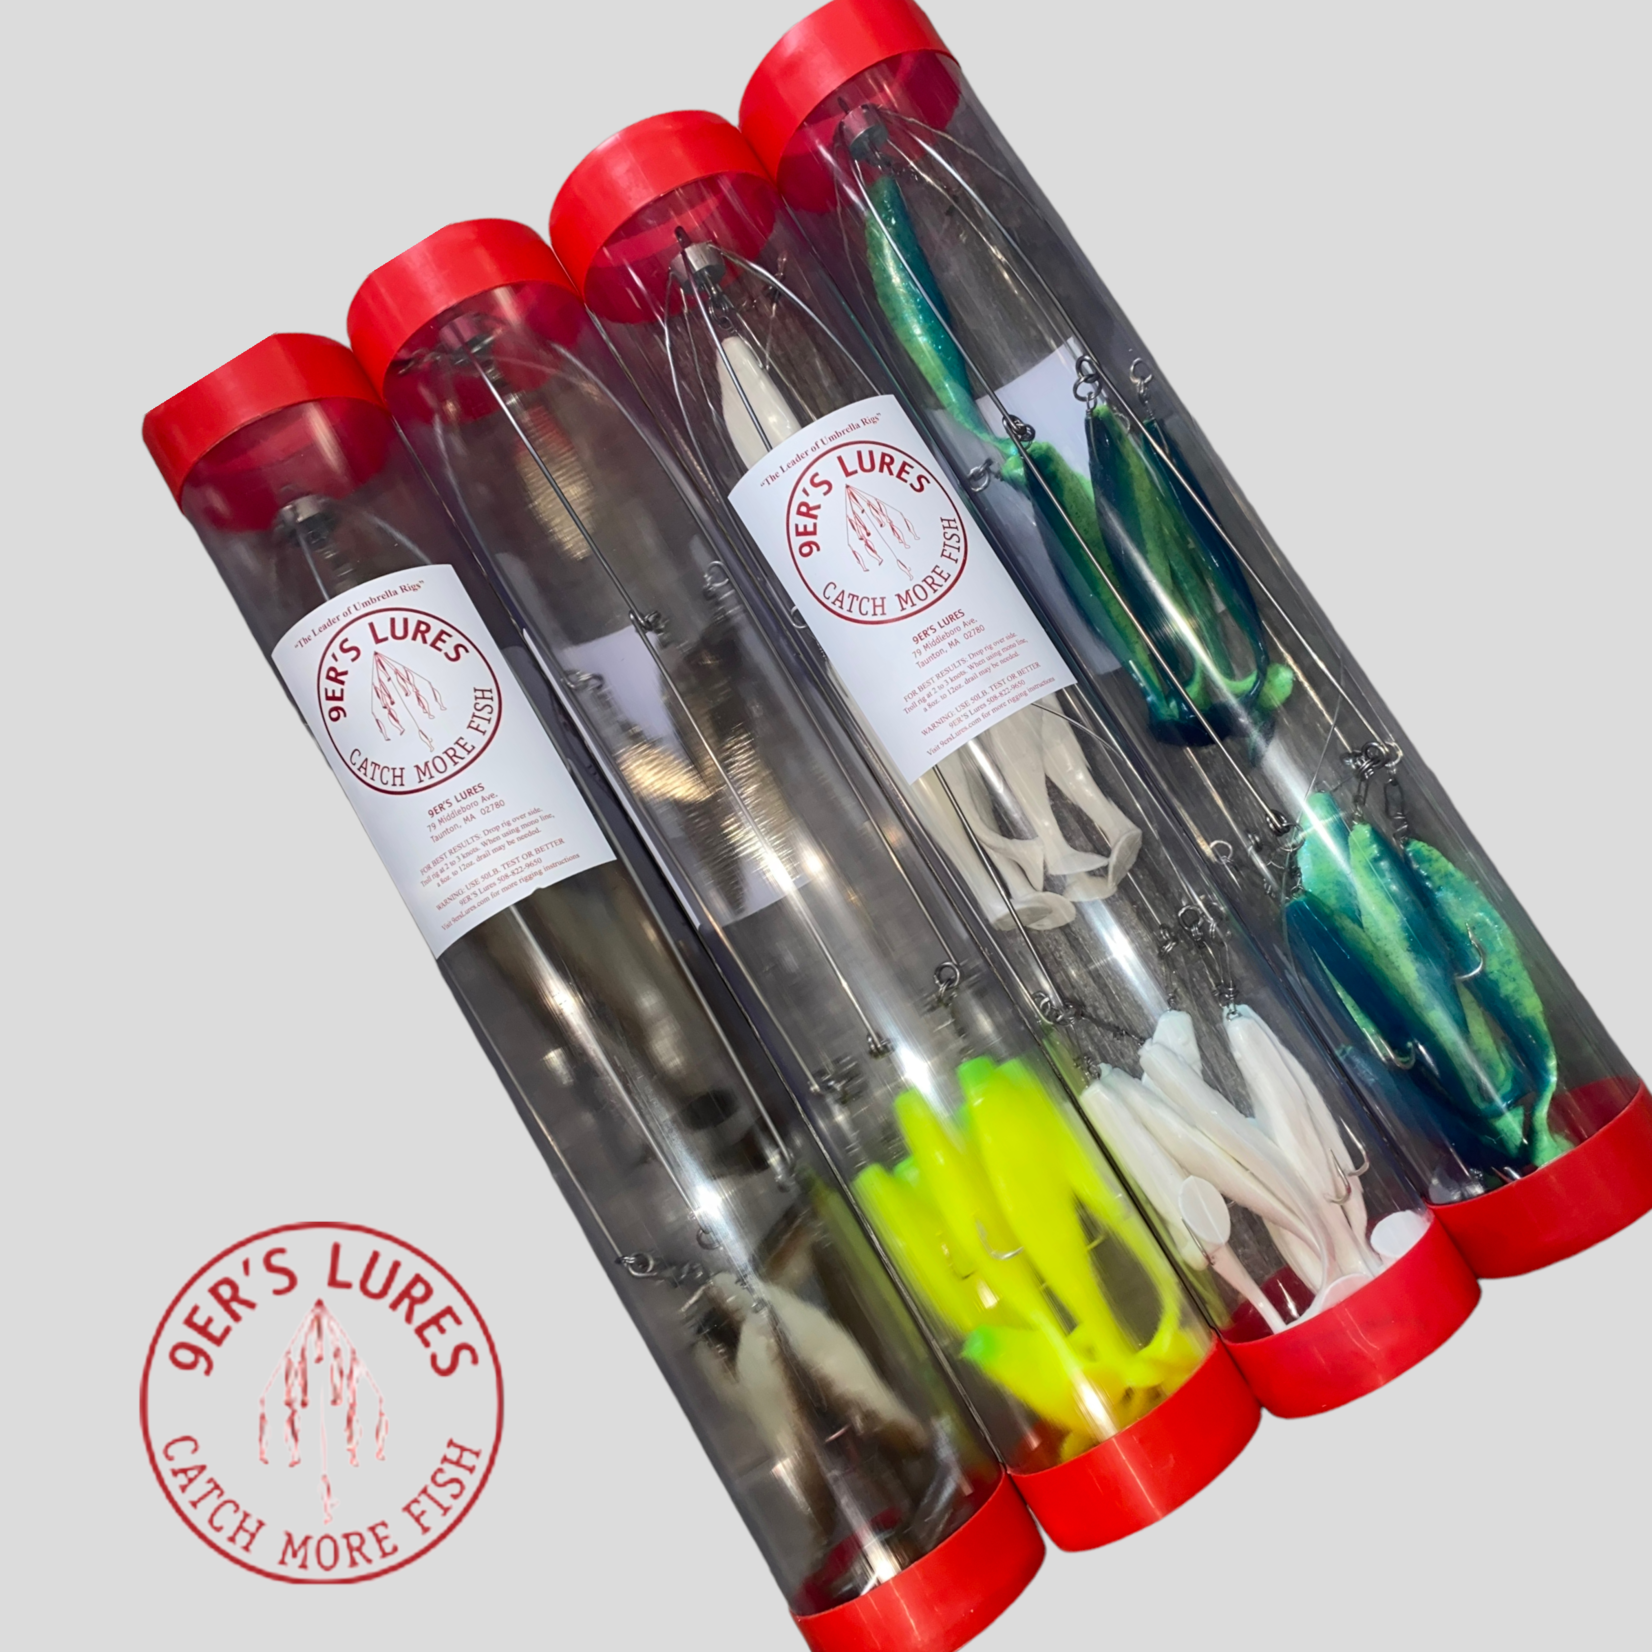 9er's Lures 9er's Lures Shad Rigs